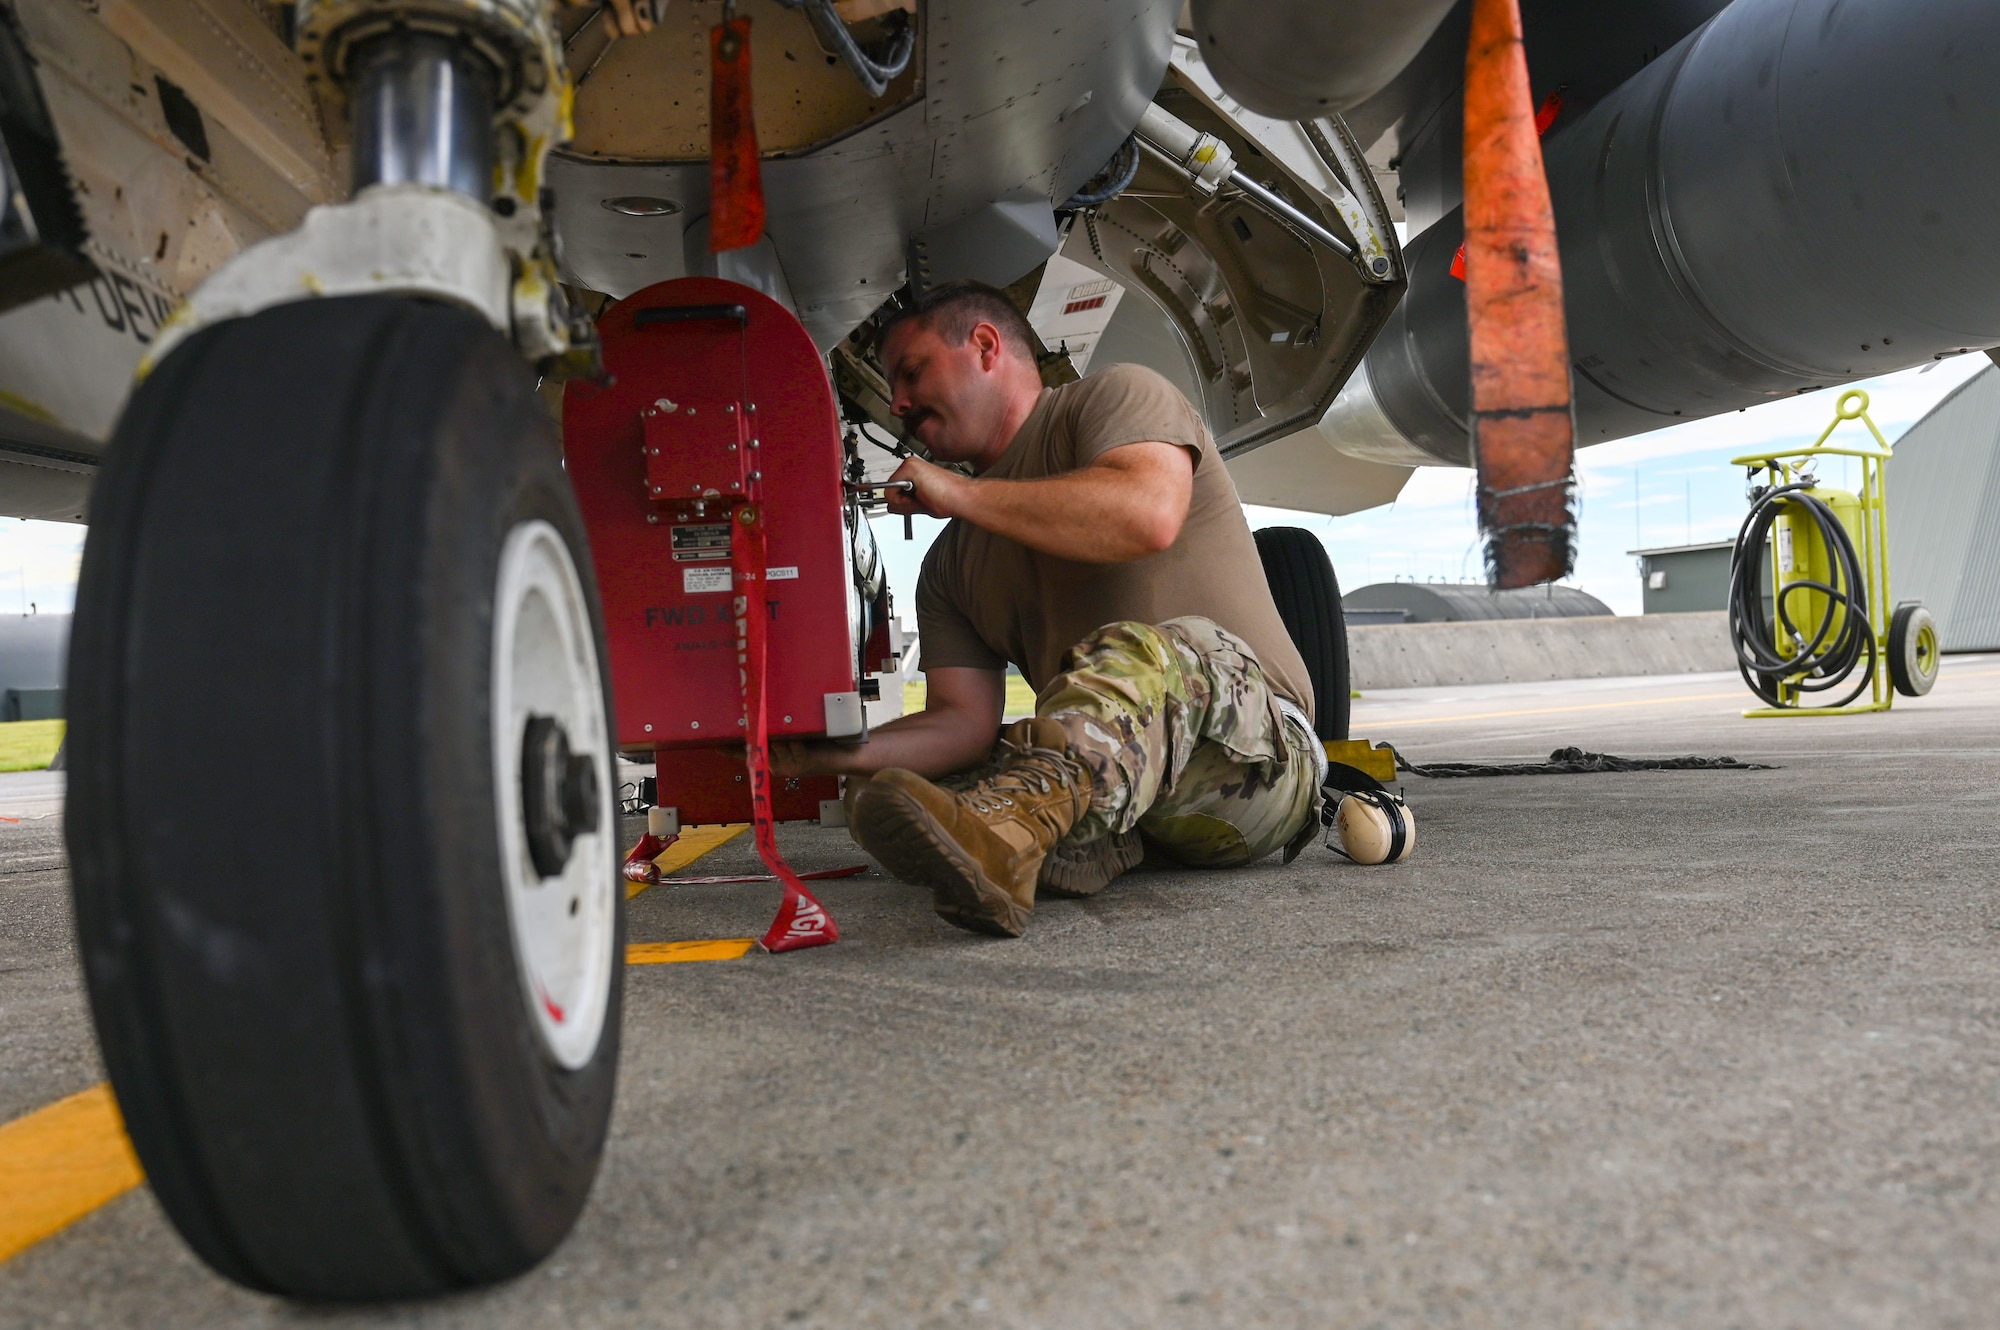 U.S. Air Force Tech. Sgt. Cody Bunderson, 87th Electronic Warfare Squadron Combat Shield flight chief, installs an AFT Transmit Coupler AN/ALQ-184 ECM Pod on a U.S Air Force F-16 Fighting Falcon at Misawa Air Base, Japan, Aug. 8, 2023. Combat Shield is responsible for assessing the defensive system readiness of Combat Air Forces (CAF) aircraft by deploying assessment teams with specialized equipment to provide senior leadership an independent assessment of the overall health of CAF systems. (U.S. Air Force photo by Staff Sgt. Ericka A. Woolever)